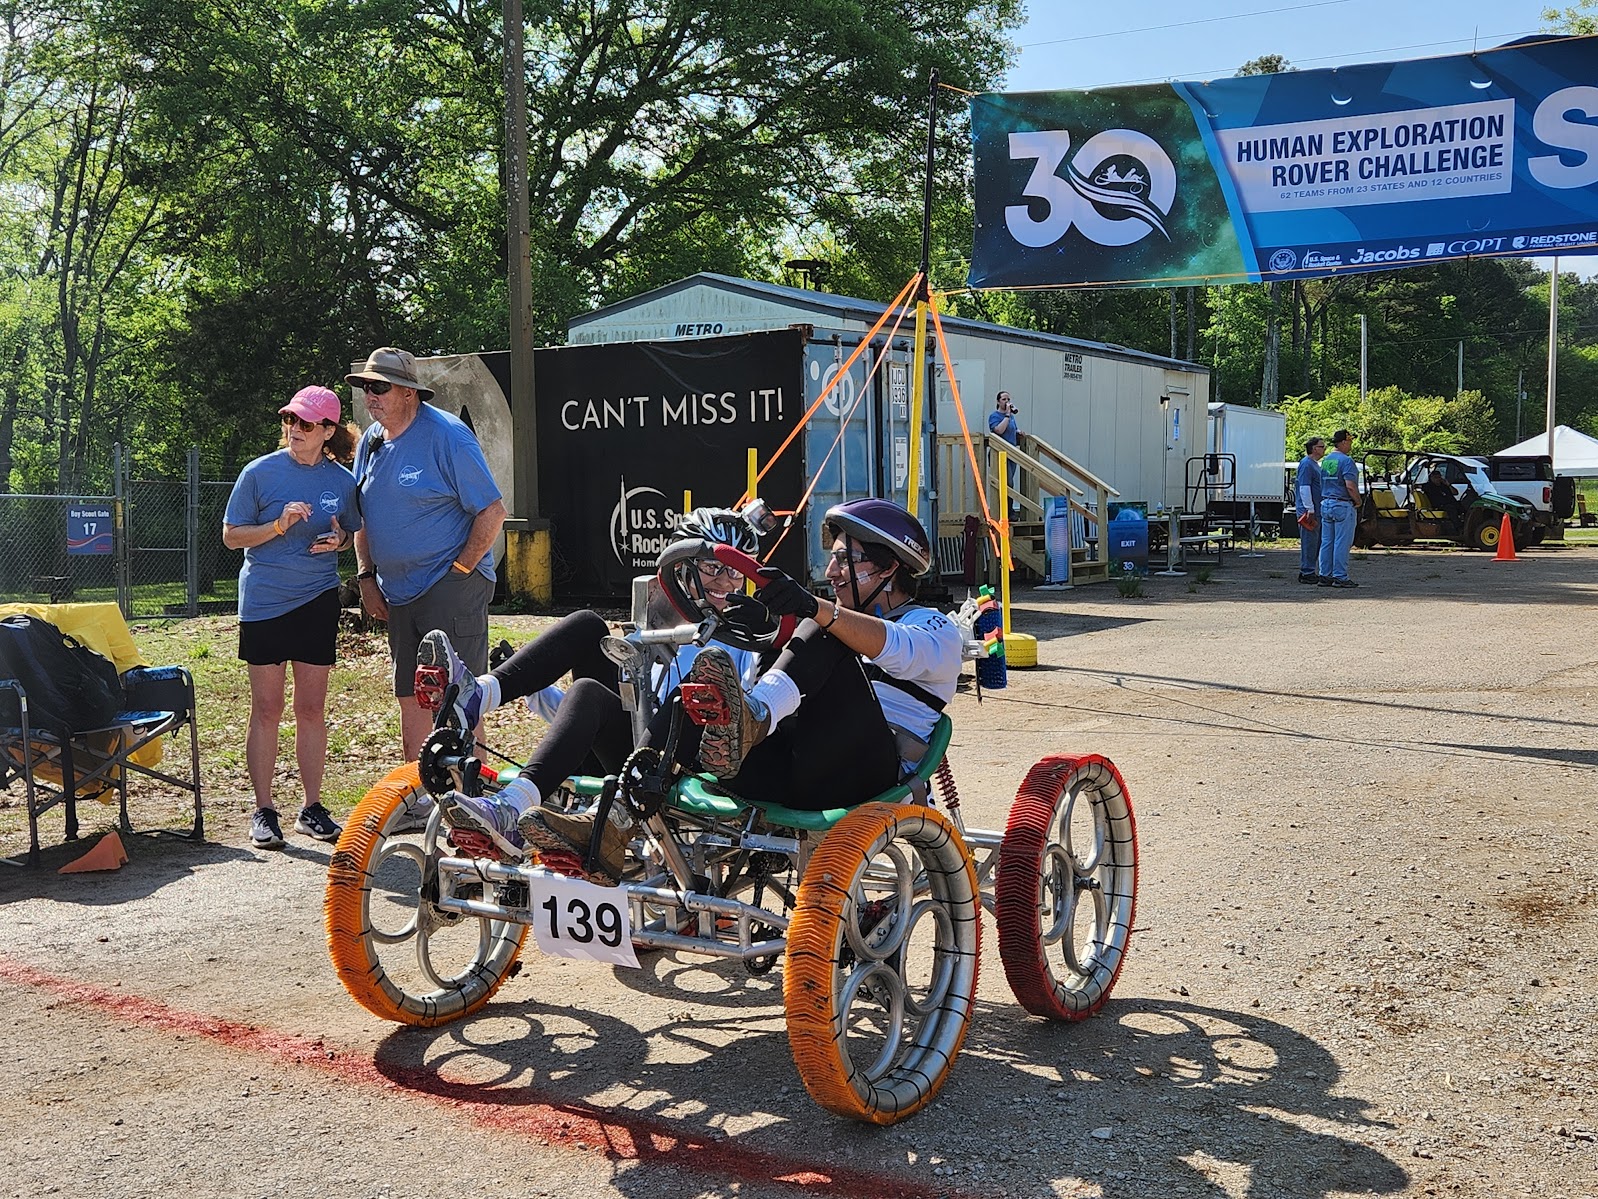 NASA Announces 30th Human Exploration Rover Challenge Winners